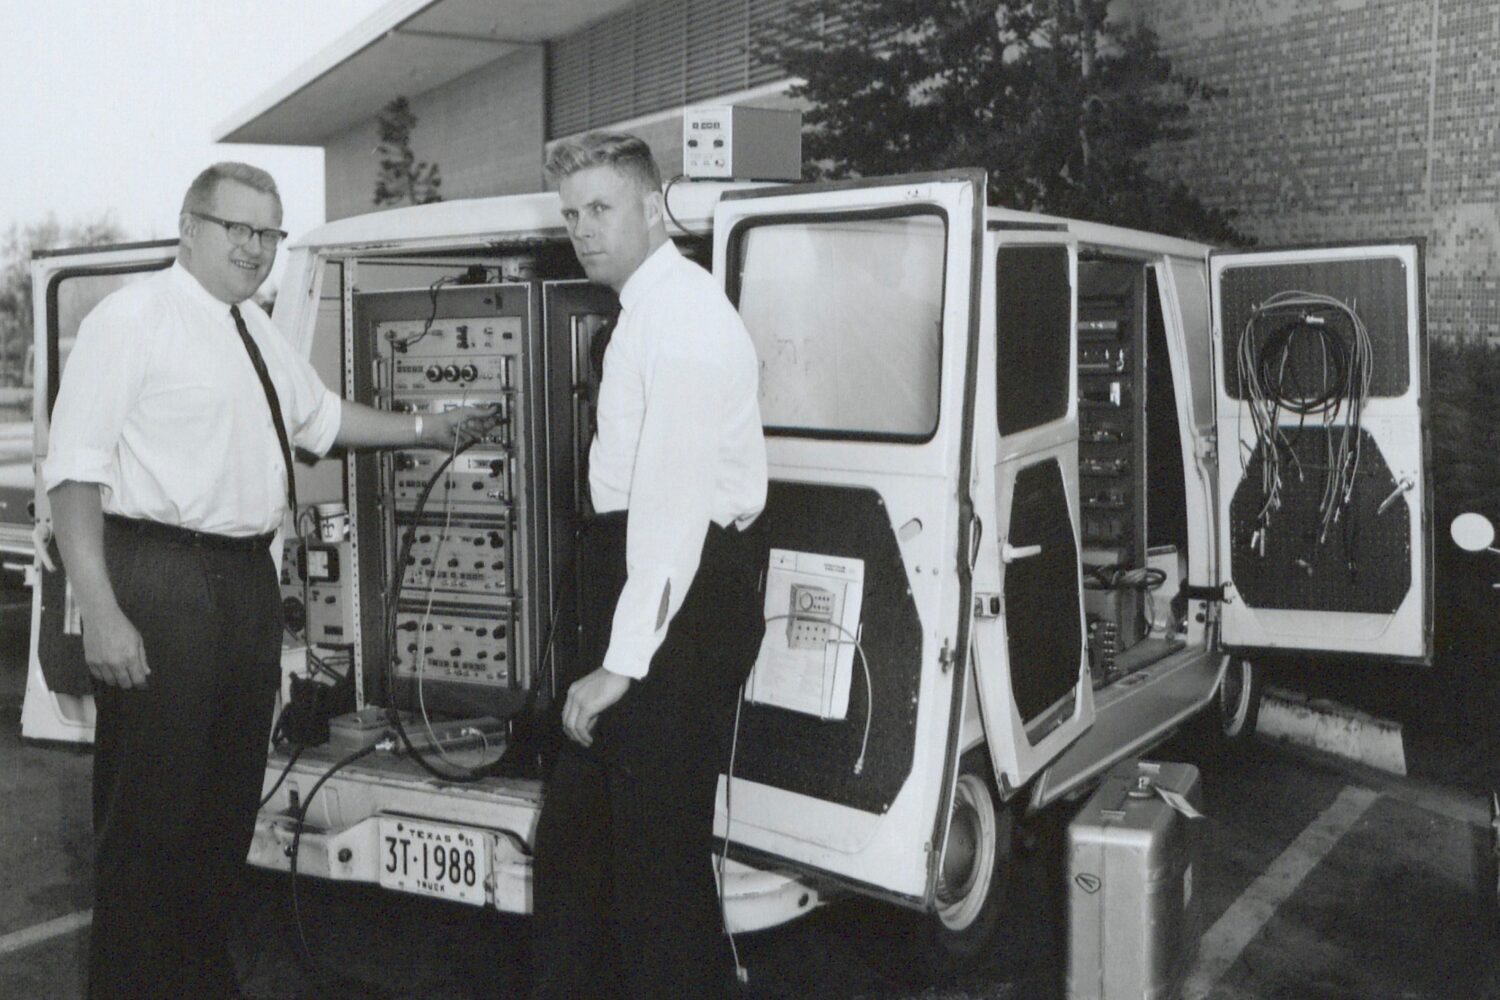 A white van that has been outfitted with HP equipment to serve as a Travelab in the 1960s.